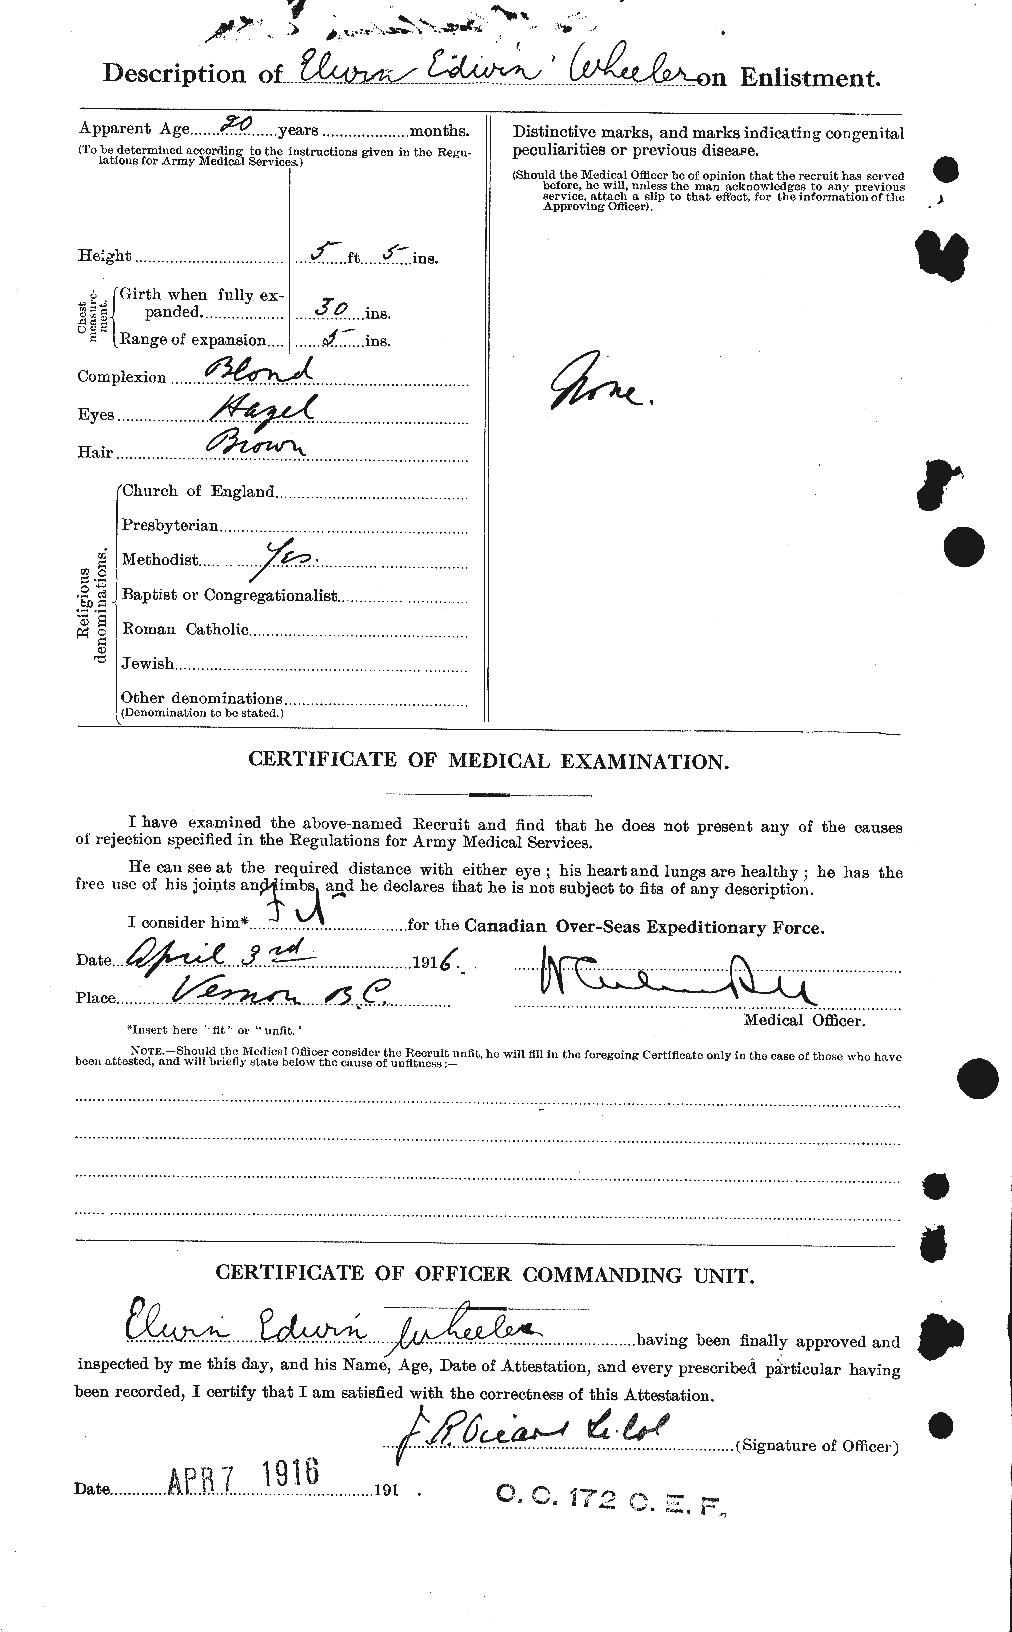 Personnel Records of the First World War - CEF 668562b